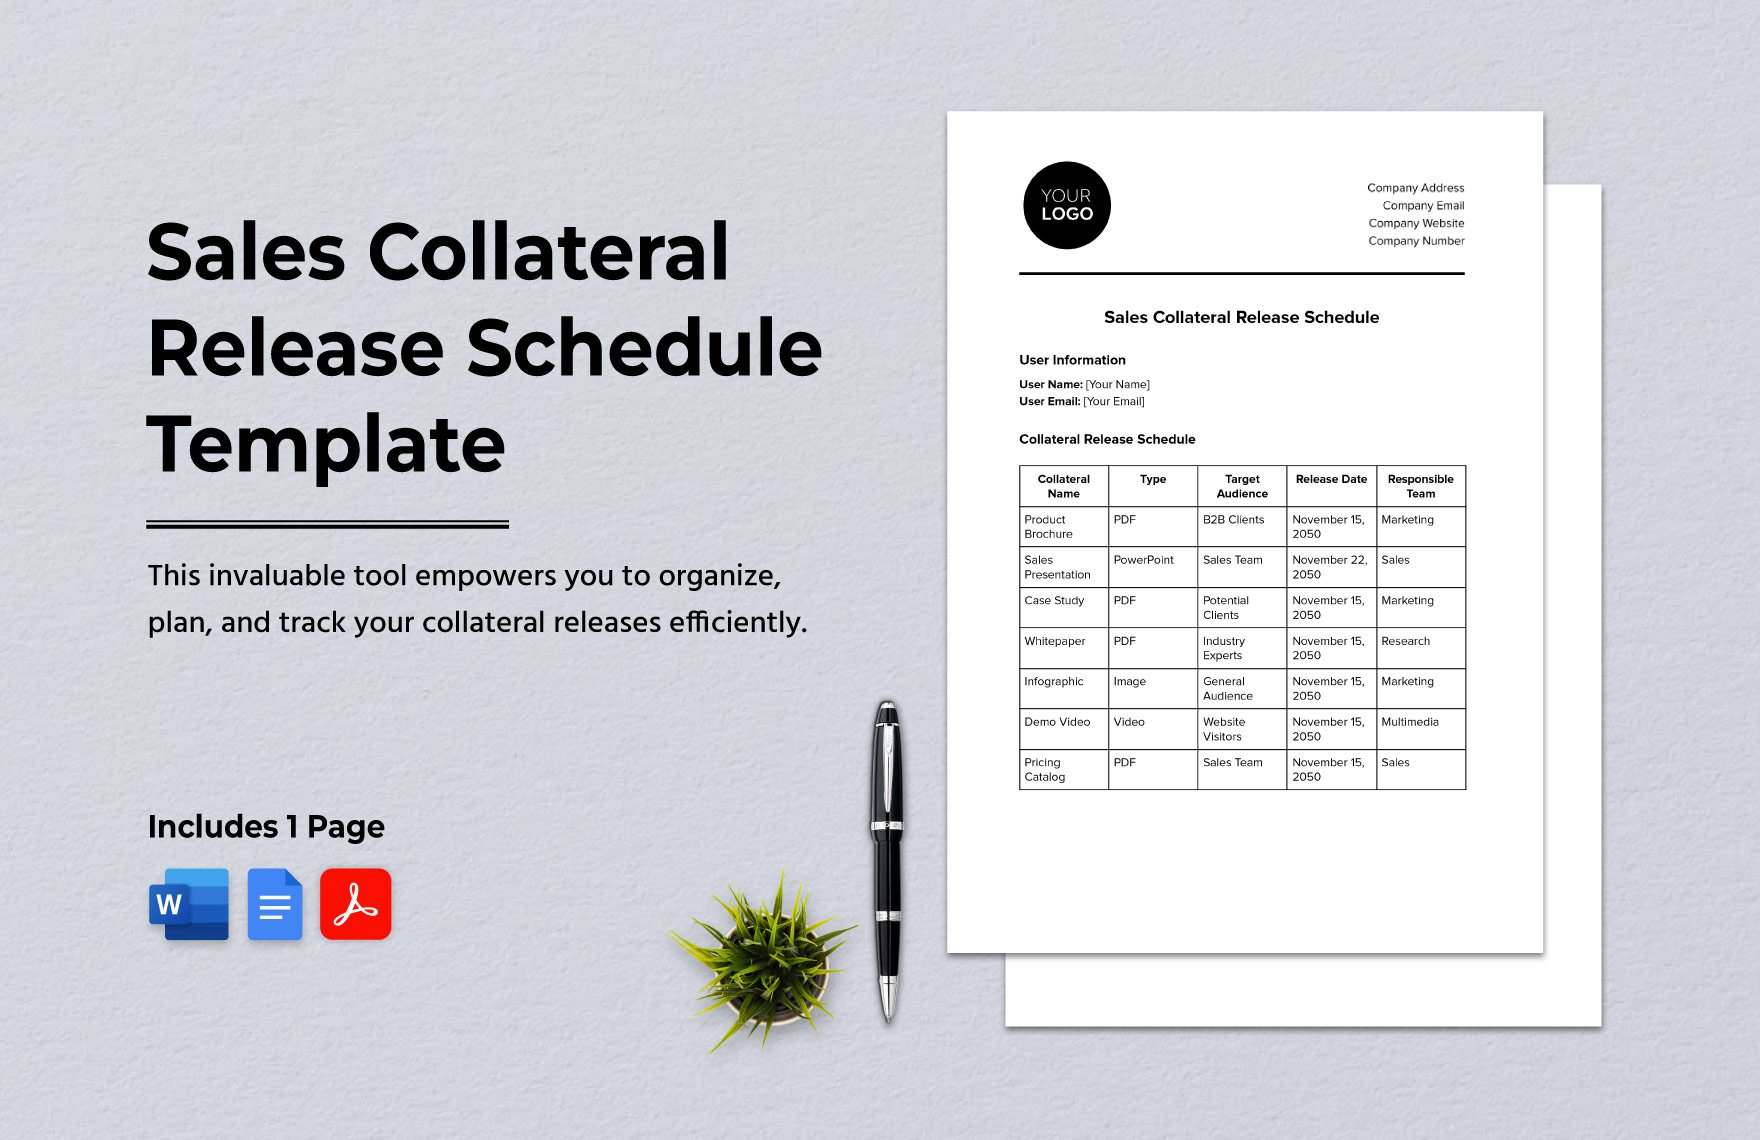 Sales Collateral Release Schedule Template in Word, Google Docs, PDF